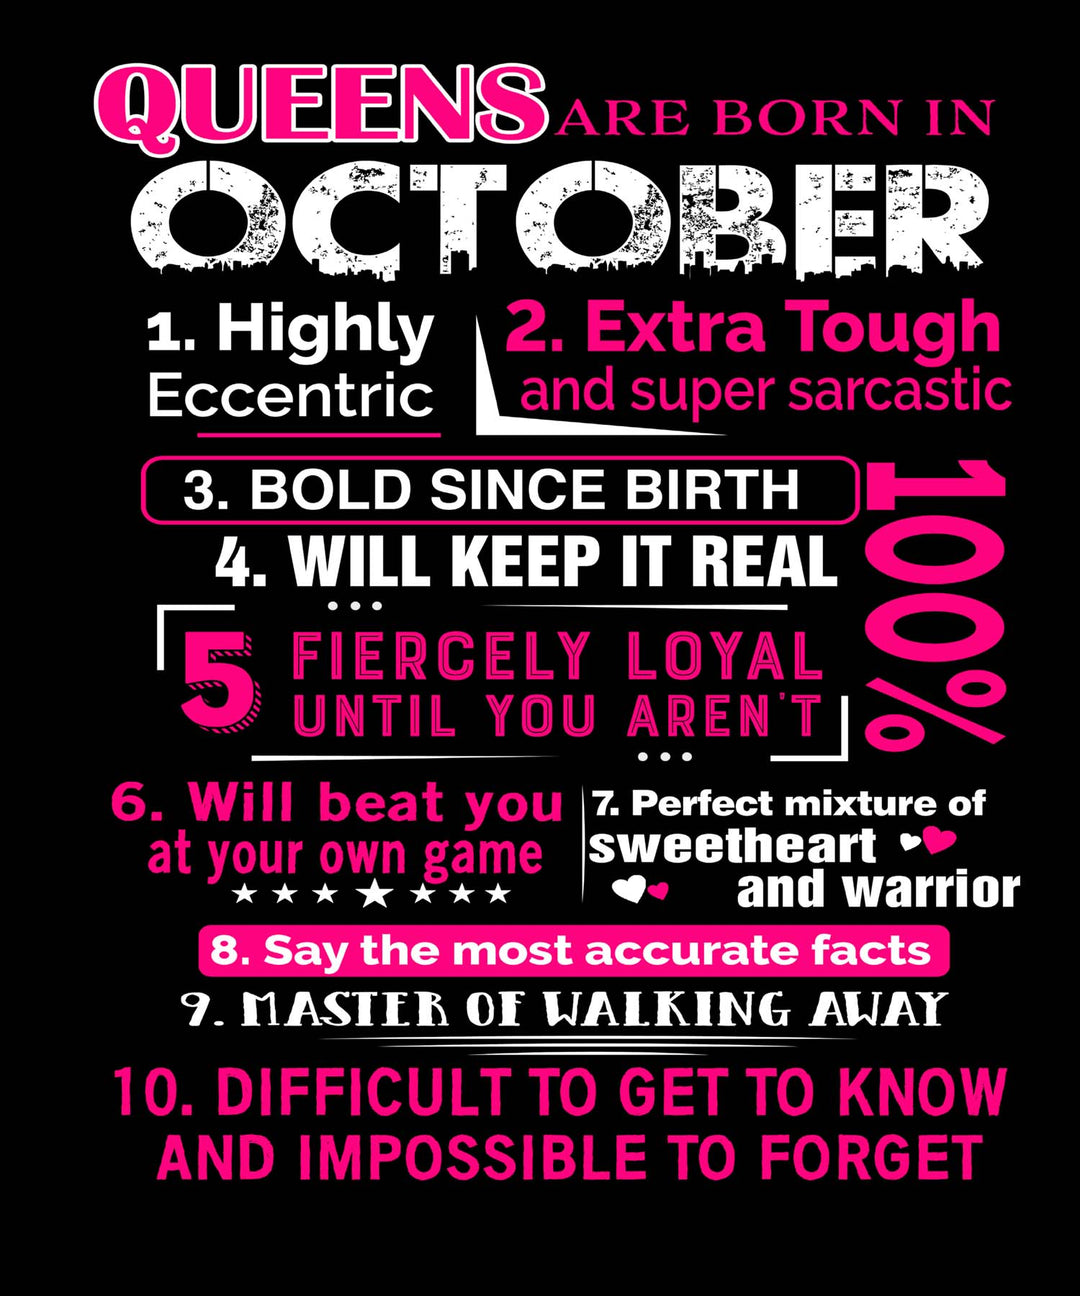 10 REASONS QUEENS ARE BORN IN OCTOBER, GET BIRTHDAY BASH